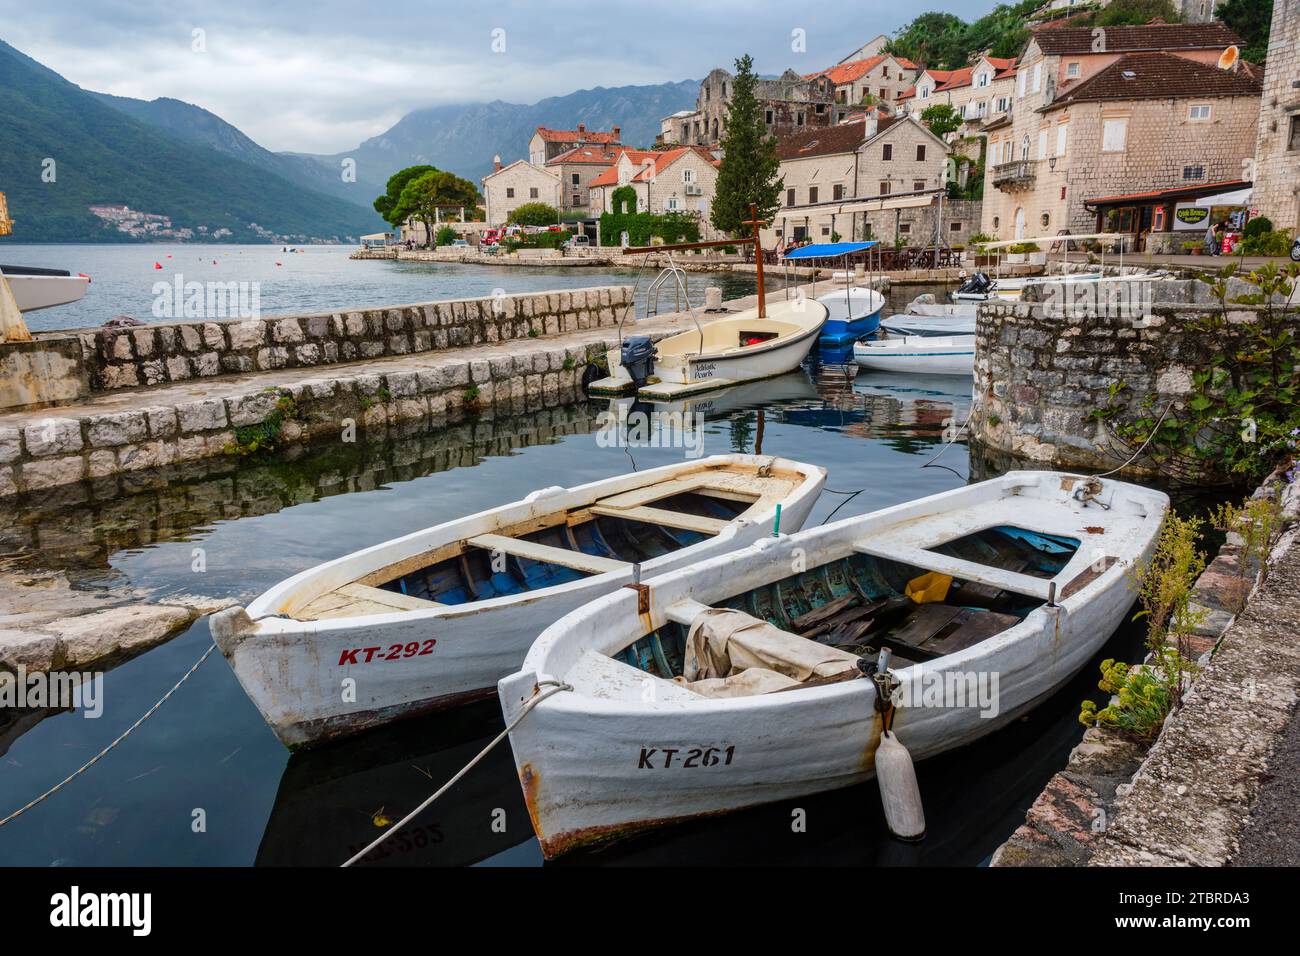 Boats in the little harbour at Perast, Bay of Kotor, Montenegro Stock Photo